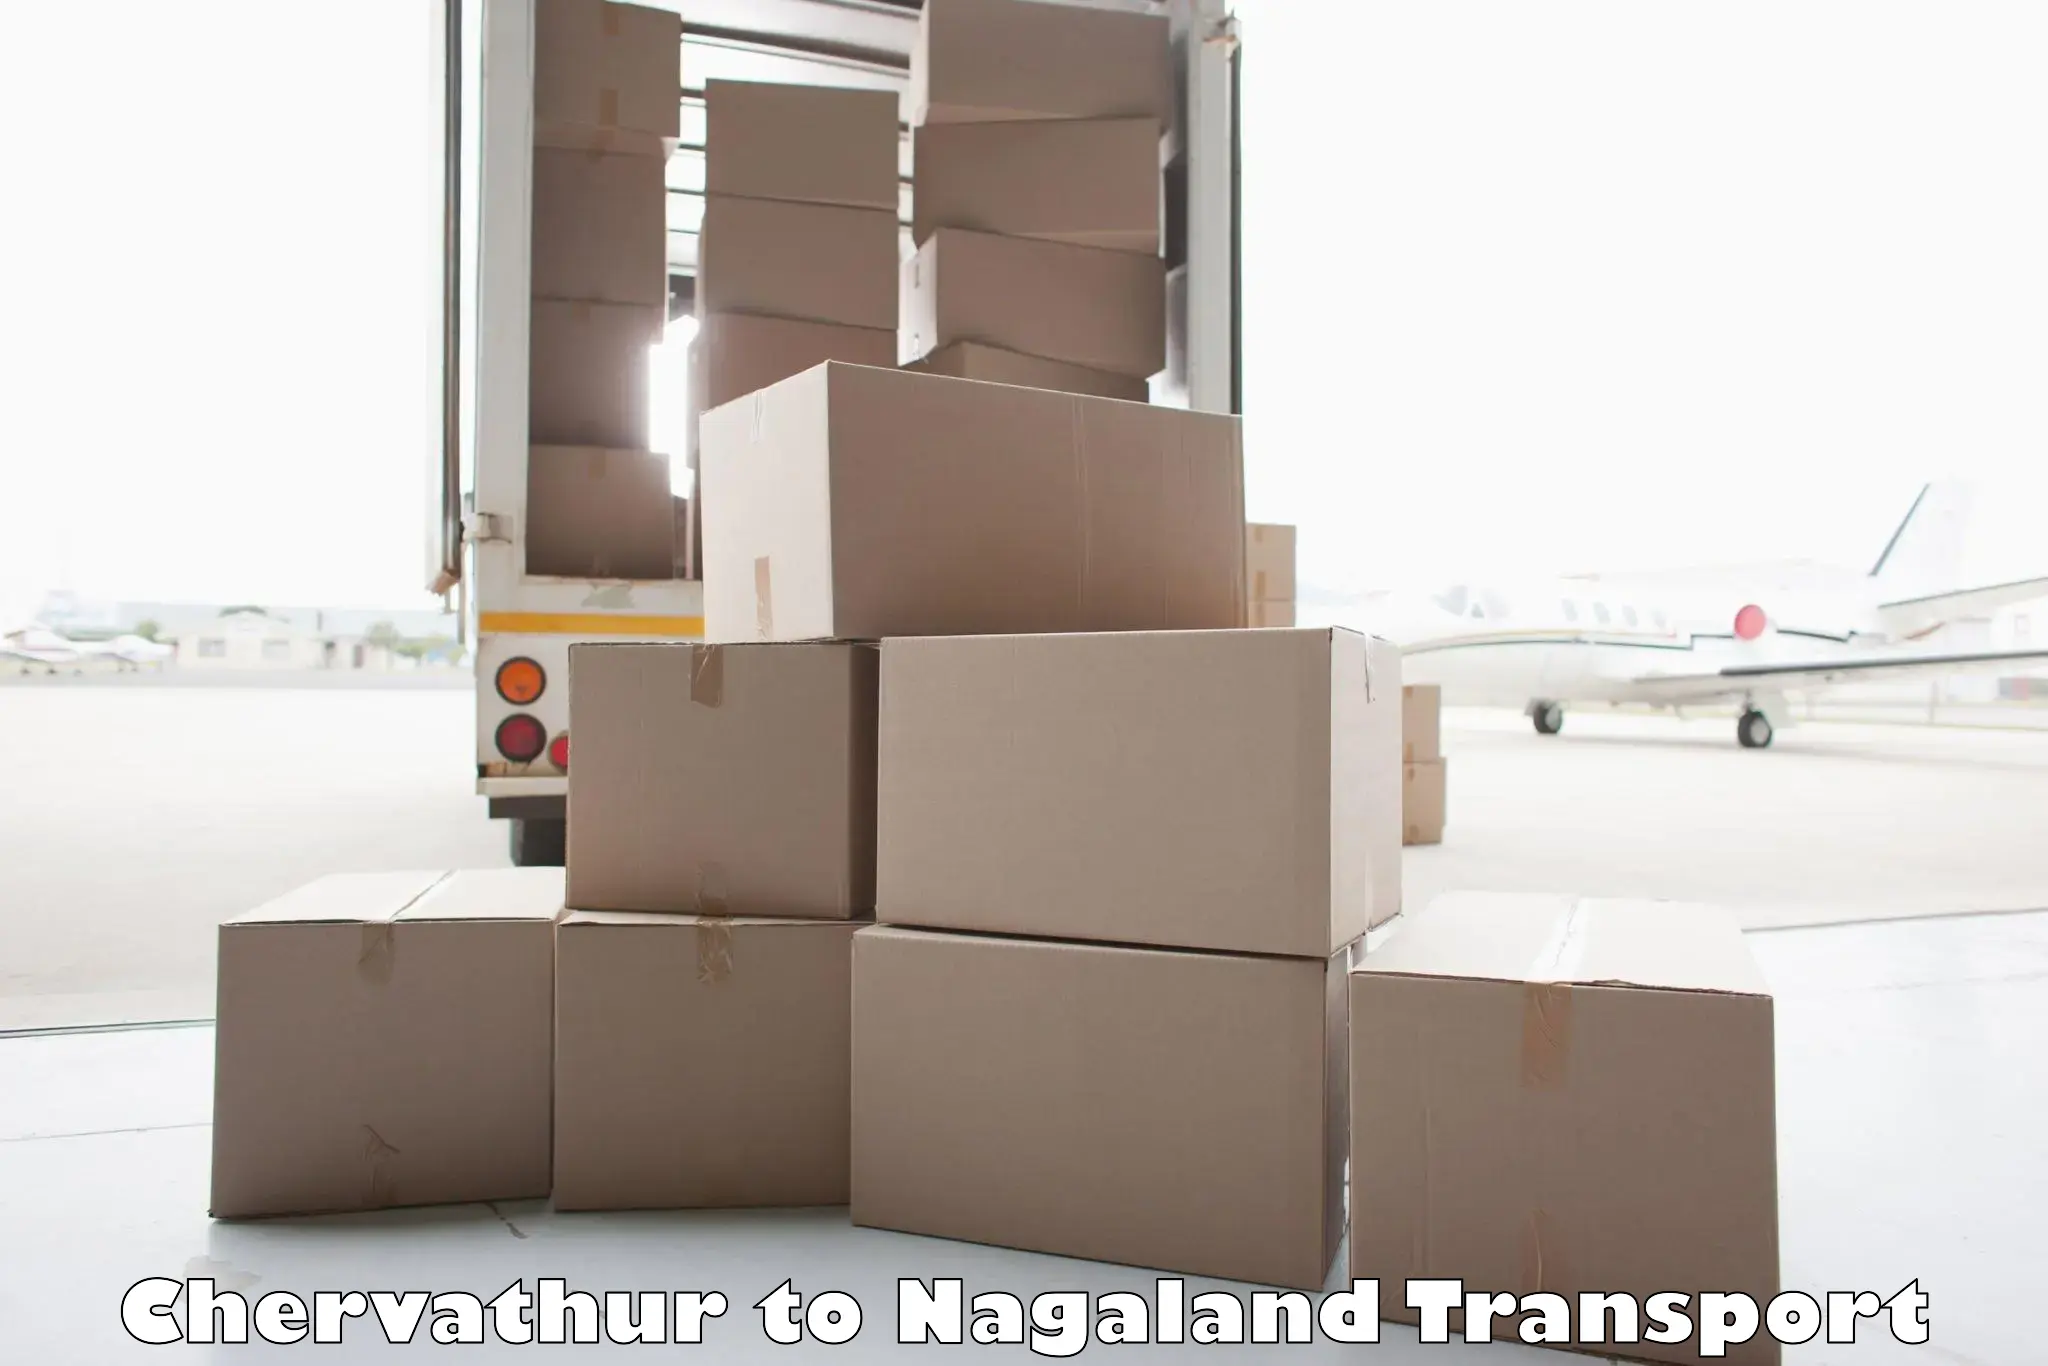 Container transportation services Chervathur to Nagaland